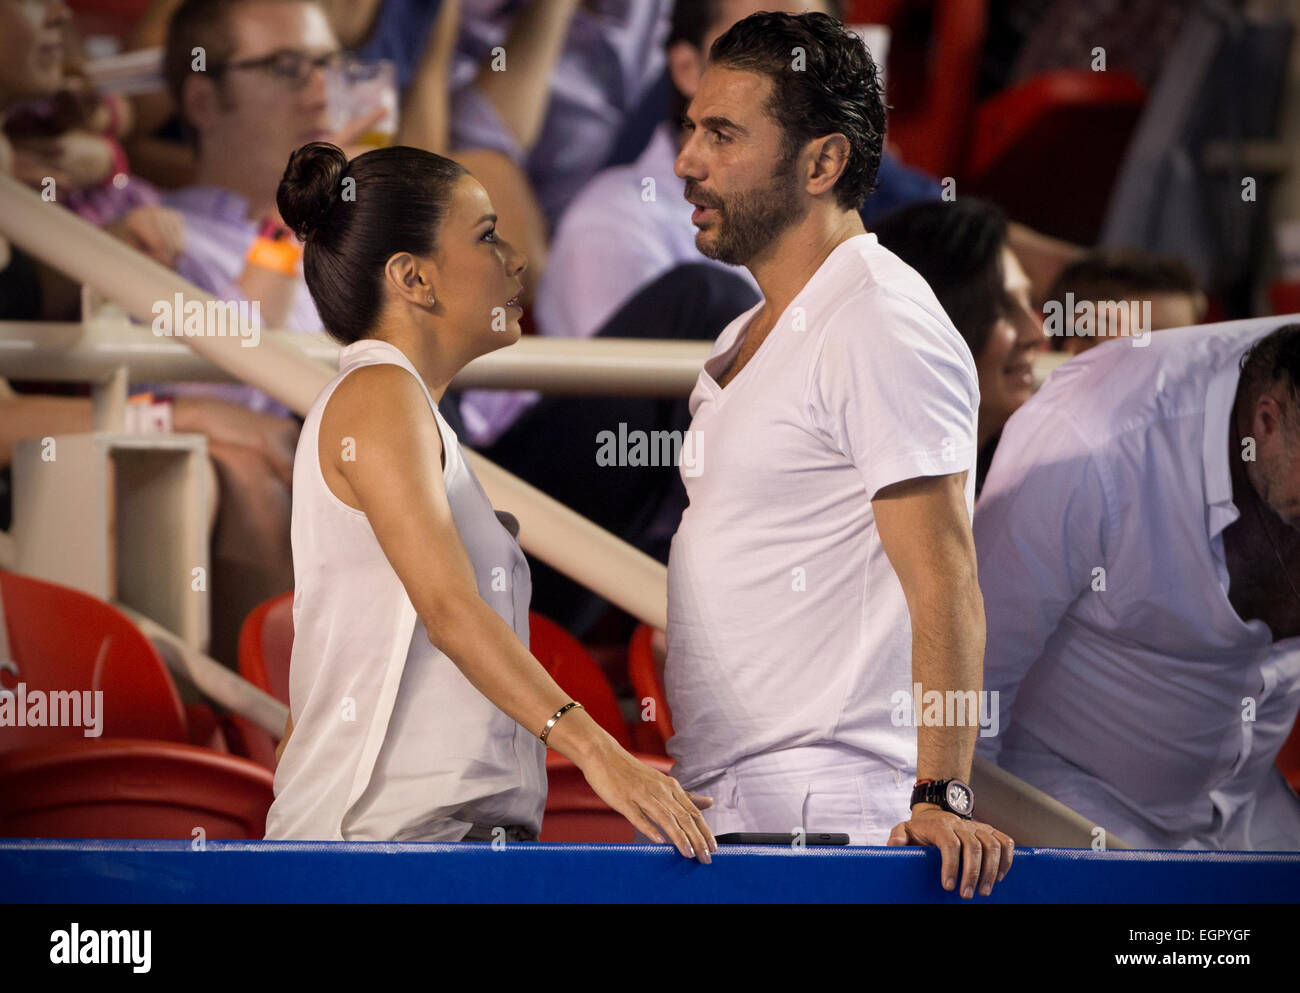 Guerrero, Mexico. 28th Feb, 2015. Actress Eva Longoria (L) reacts during the final match of men's singles of the Mexican Tennis Open 2015 tournament between Japan's Kei Nishikori and Spain's David Ferrer in Acapulco, Guerrero state, Mexico, on Feb. 28, 2015. Credit:  Alejandro Ayala/Xinhua/Alamy Live News Stock Photo